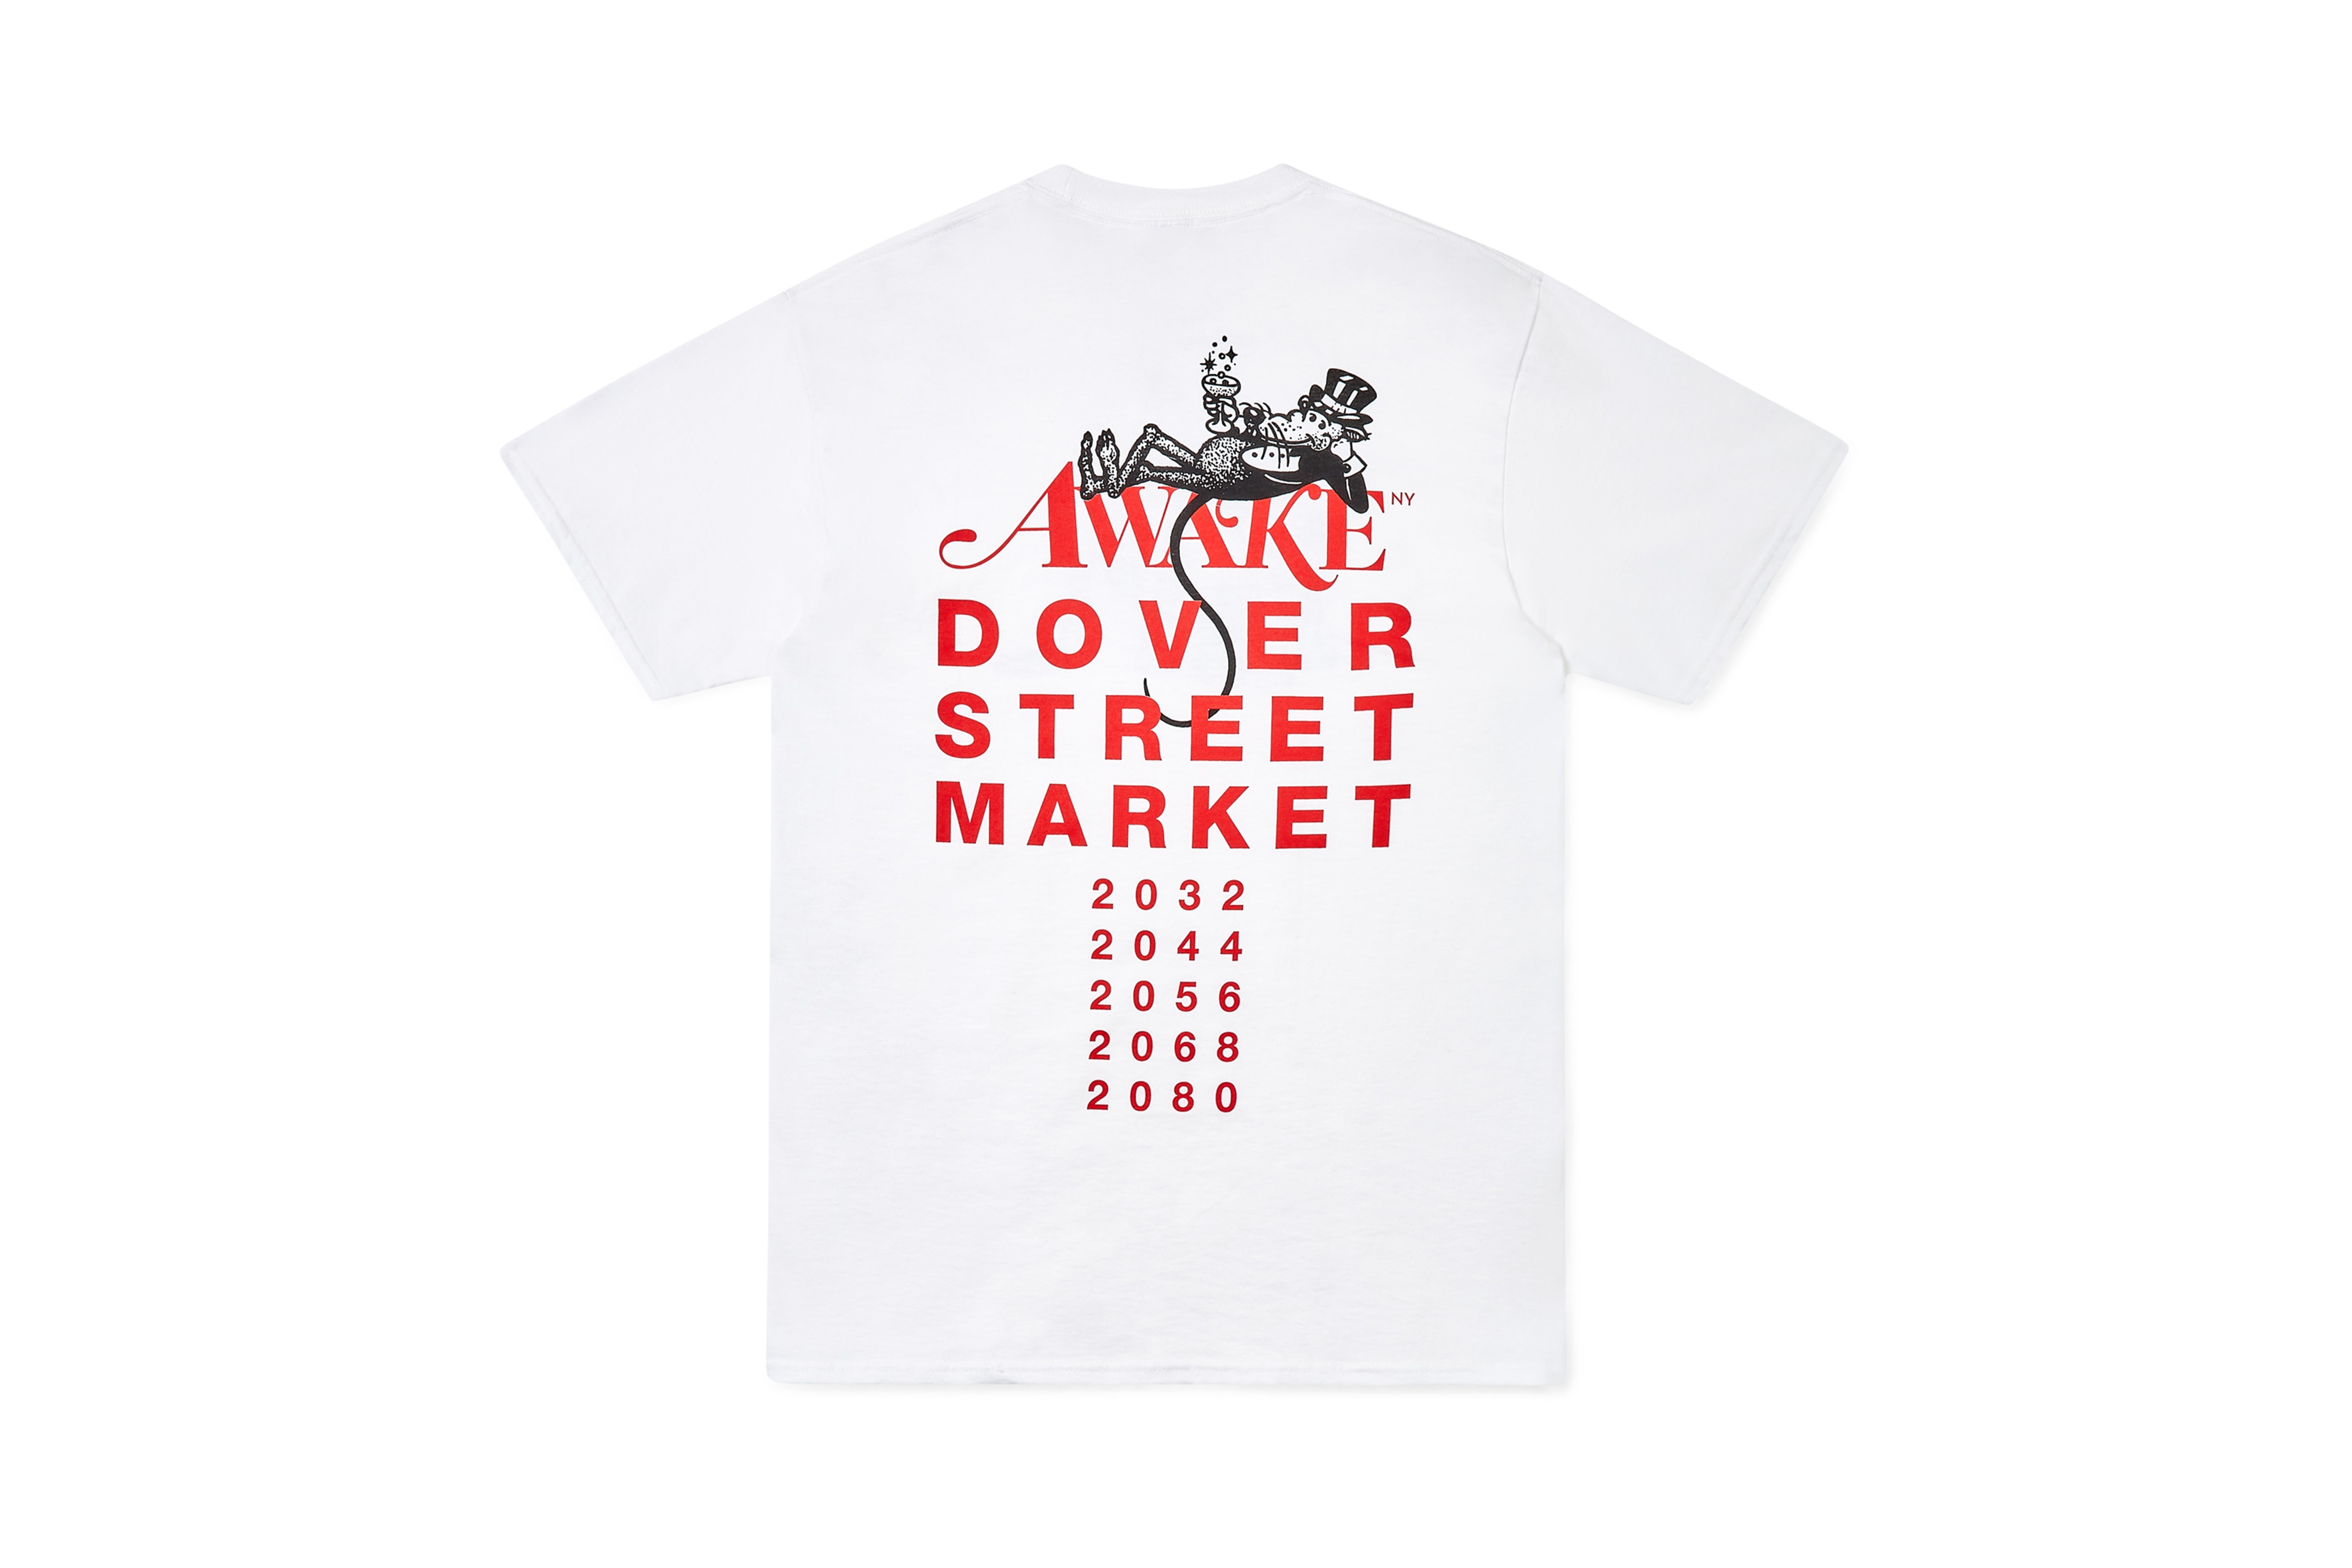 dover street market year of the rat lunar new year capsule collection collaboration bape richardson stussy brain dead nike snoopy cactus plant flea market doublet clot awake ny